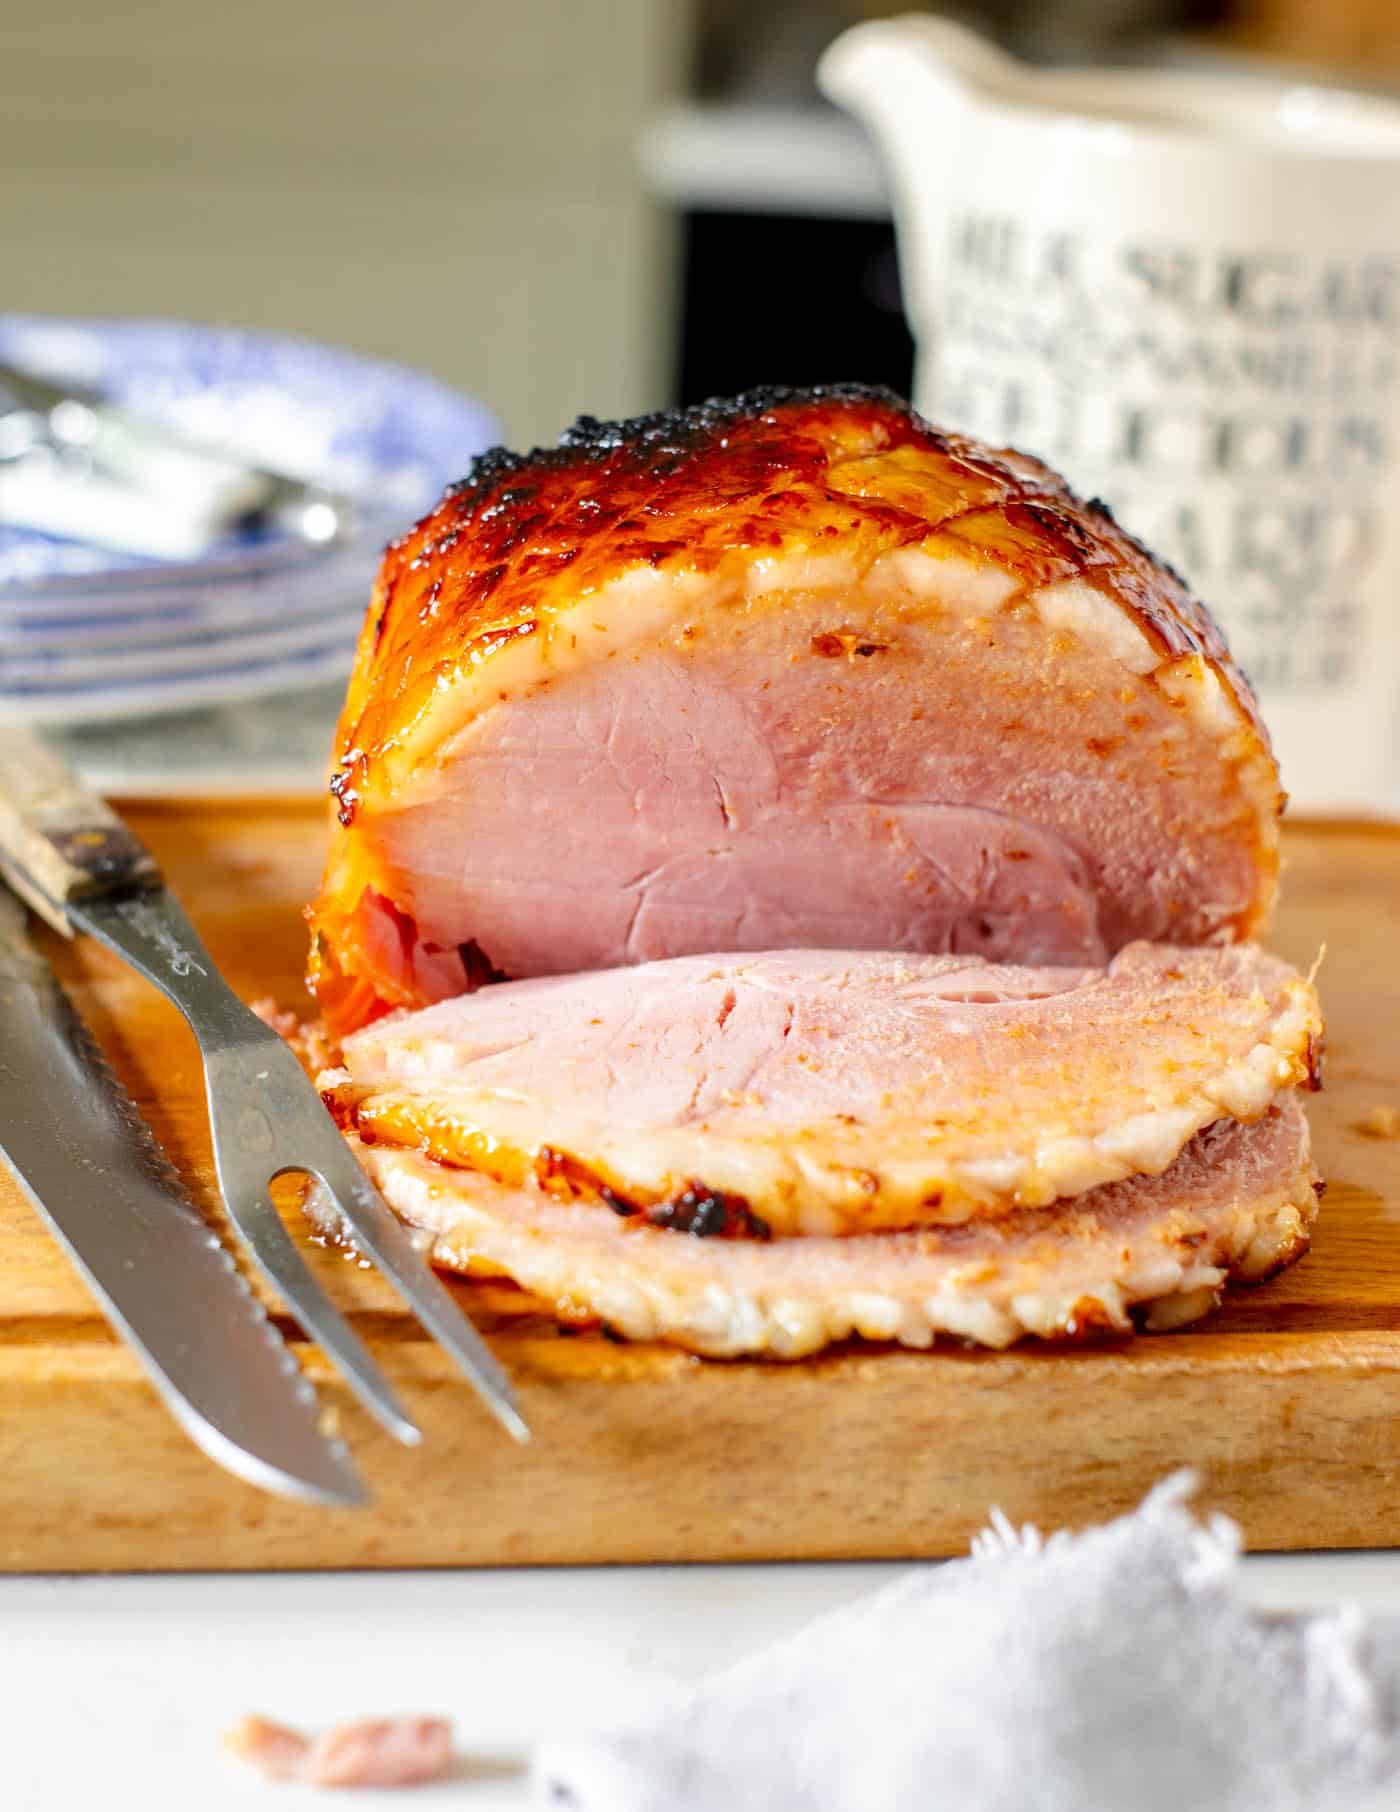 sliced gammon joint on a wooden chopping board with a carving knife and fork resting to the side. Plates are stacked behind with knives and forks on top.